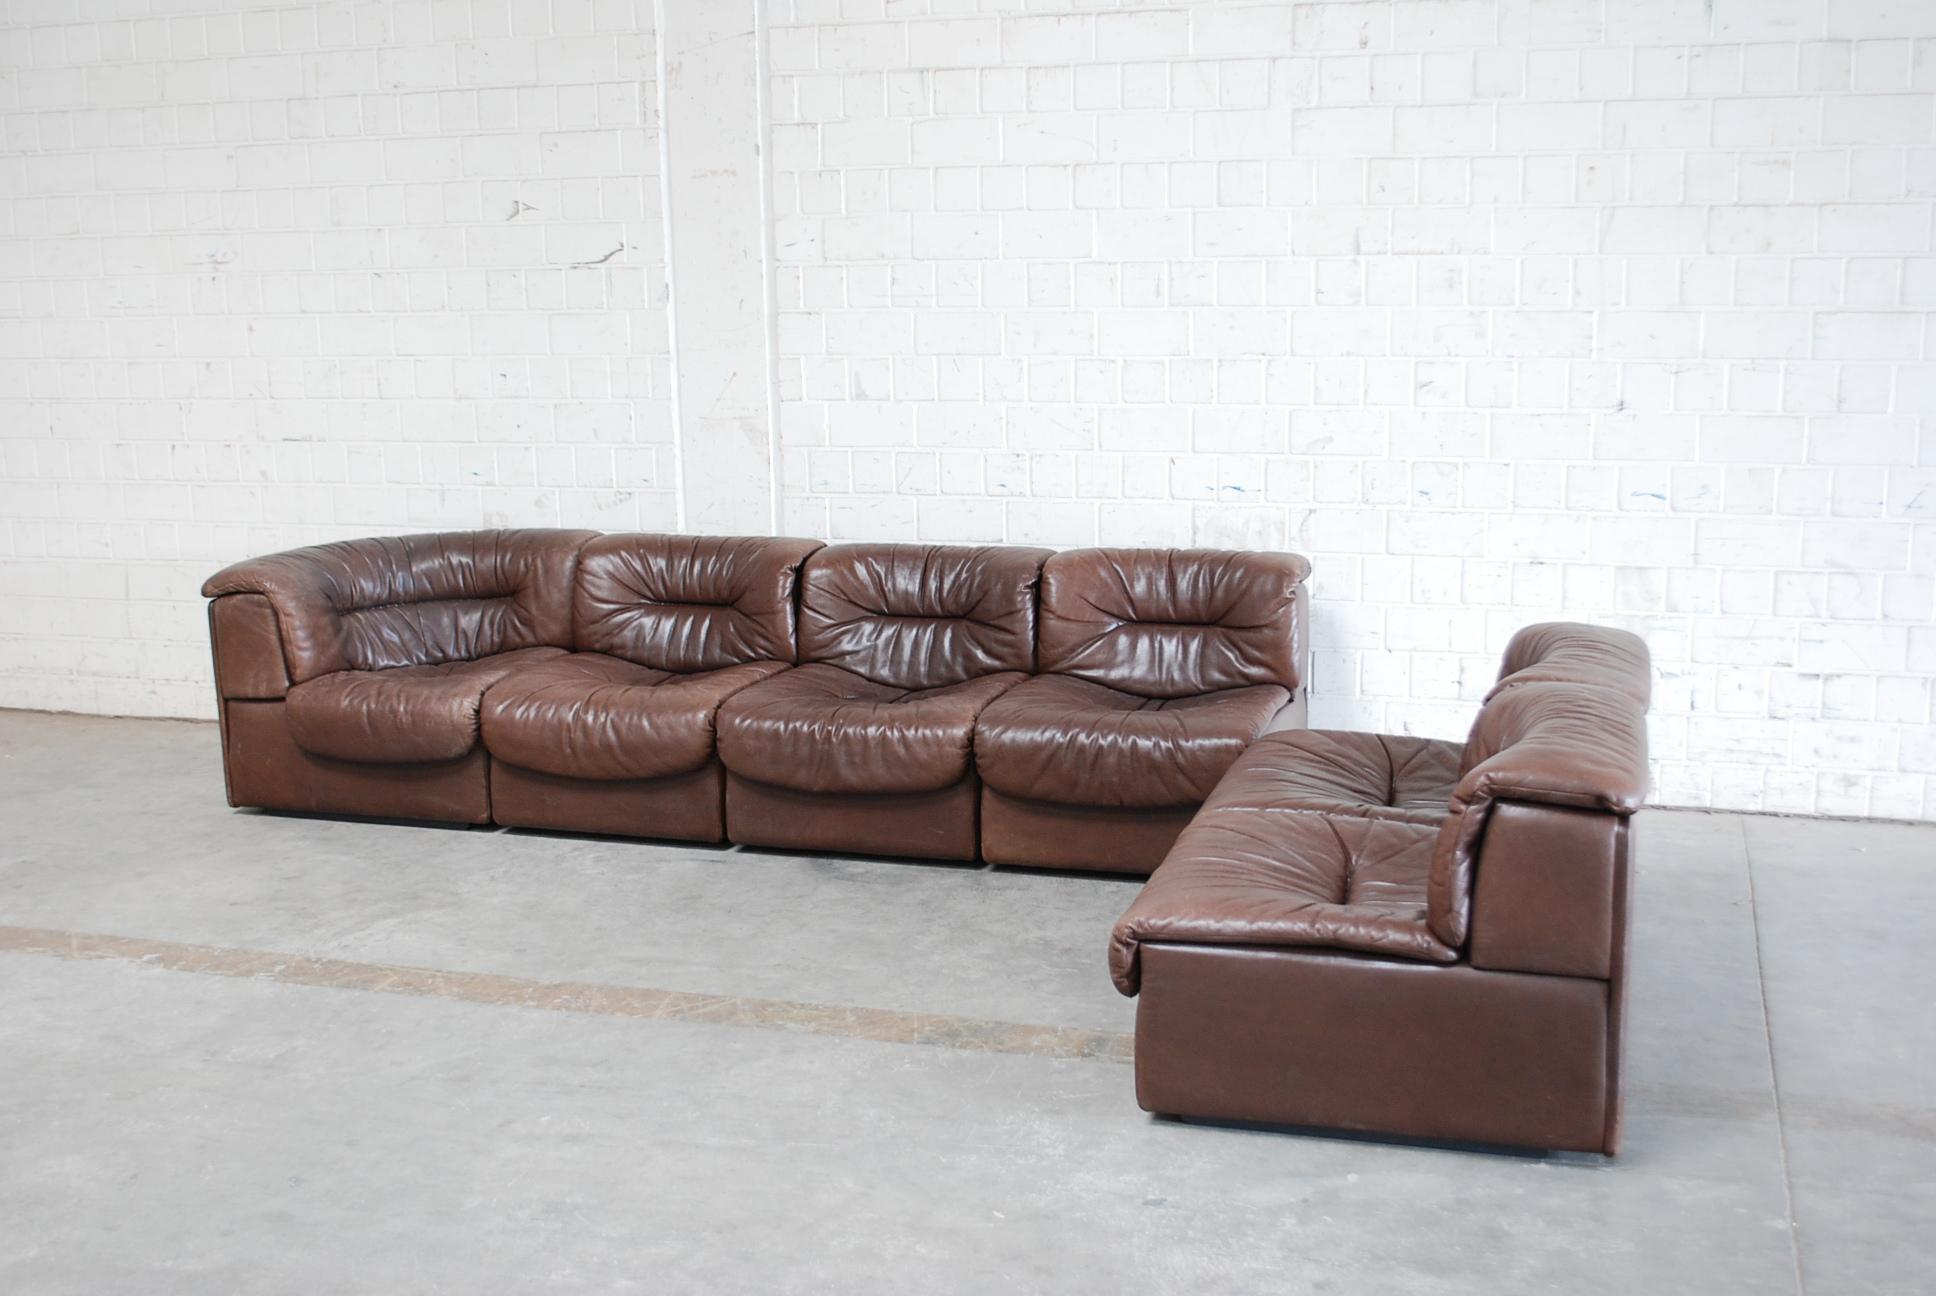 De Sede  DS 14 module sofa in brown leather.
Vintage Condition.
It consists of 6 elements including 1 end and 5 single elements. 
It can be transformed in different variations.
De Sede is known for best leather craftsman quality from Switzerland.